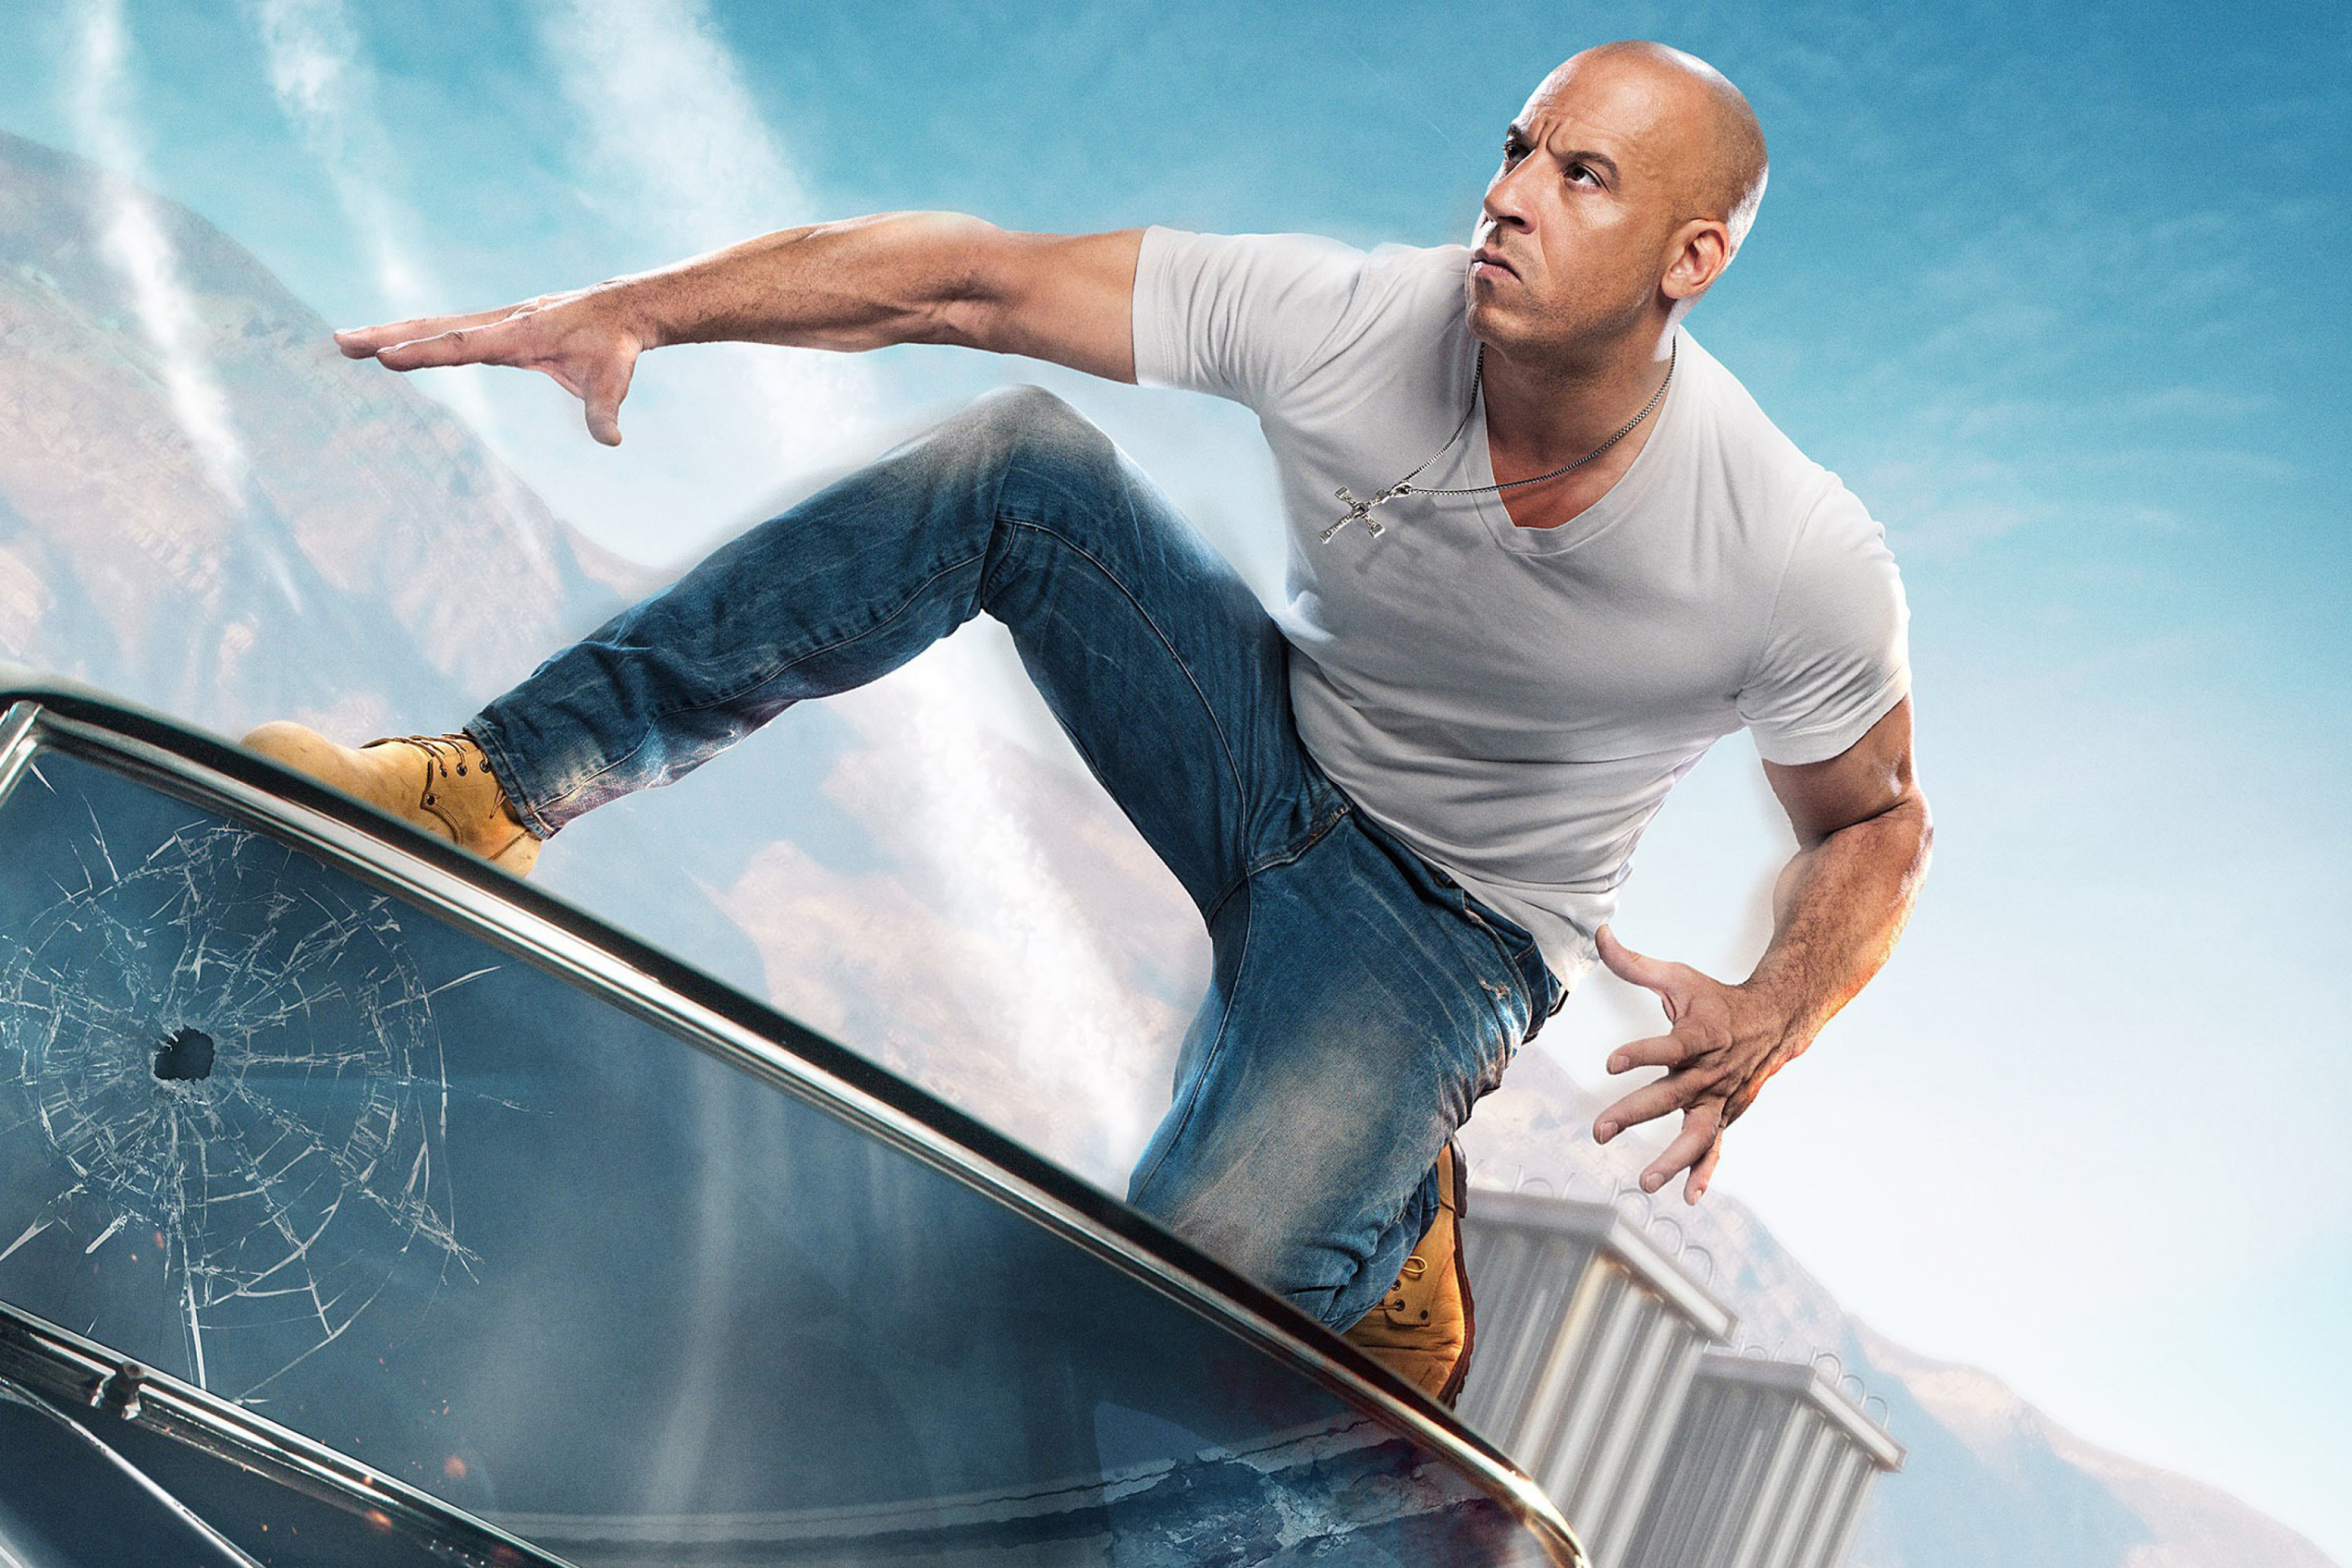 Fast & Furious Supercharged Poster with Vin Diesel wallpaper 2880x1920